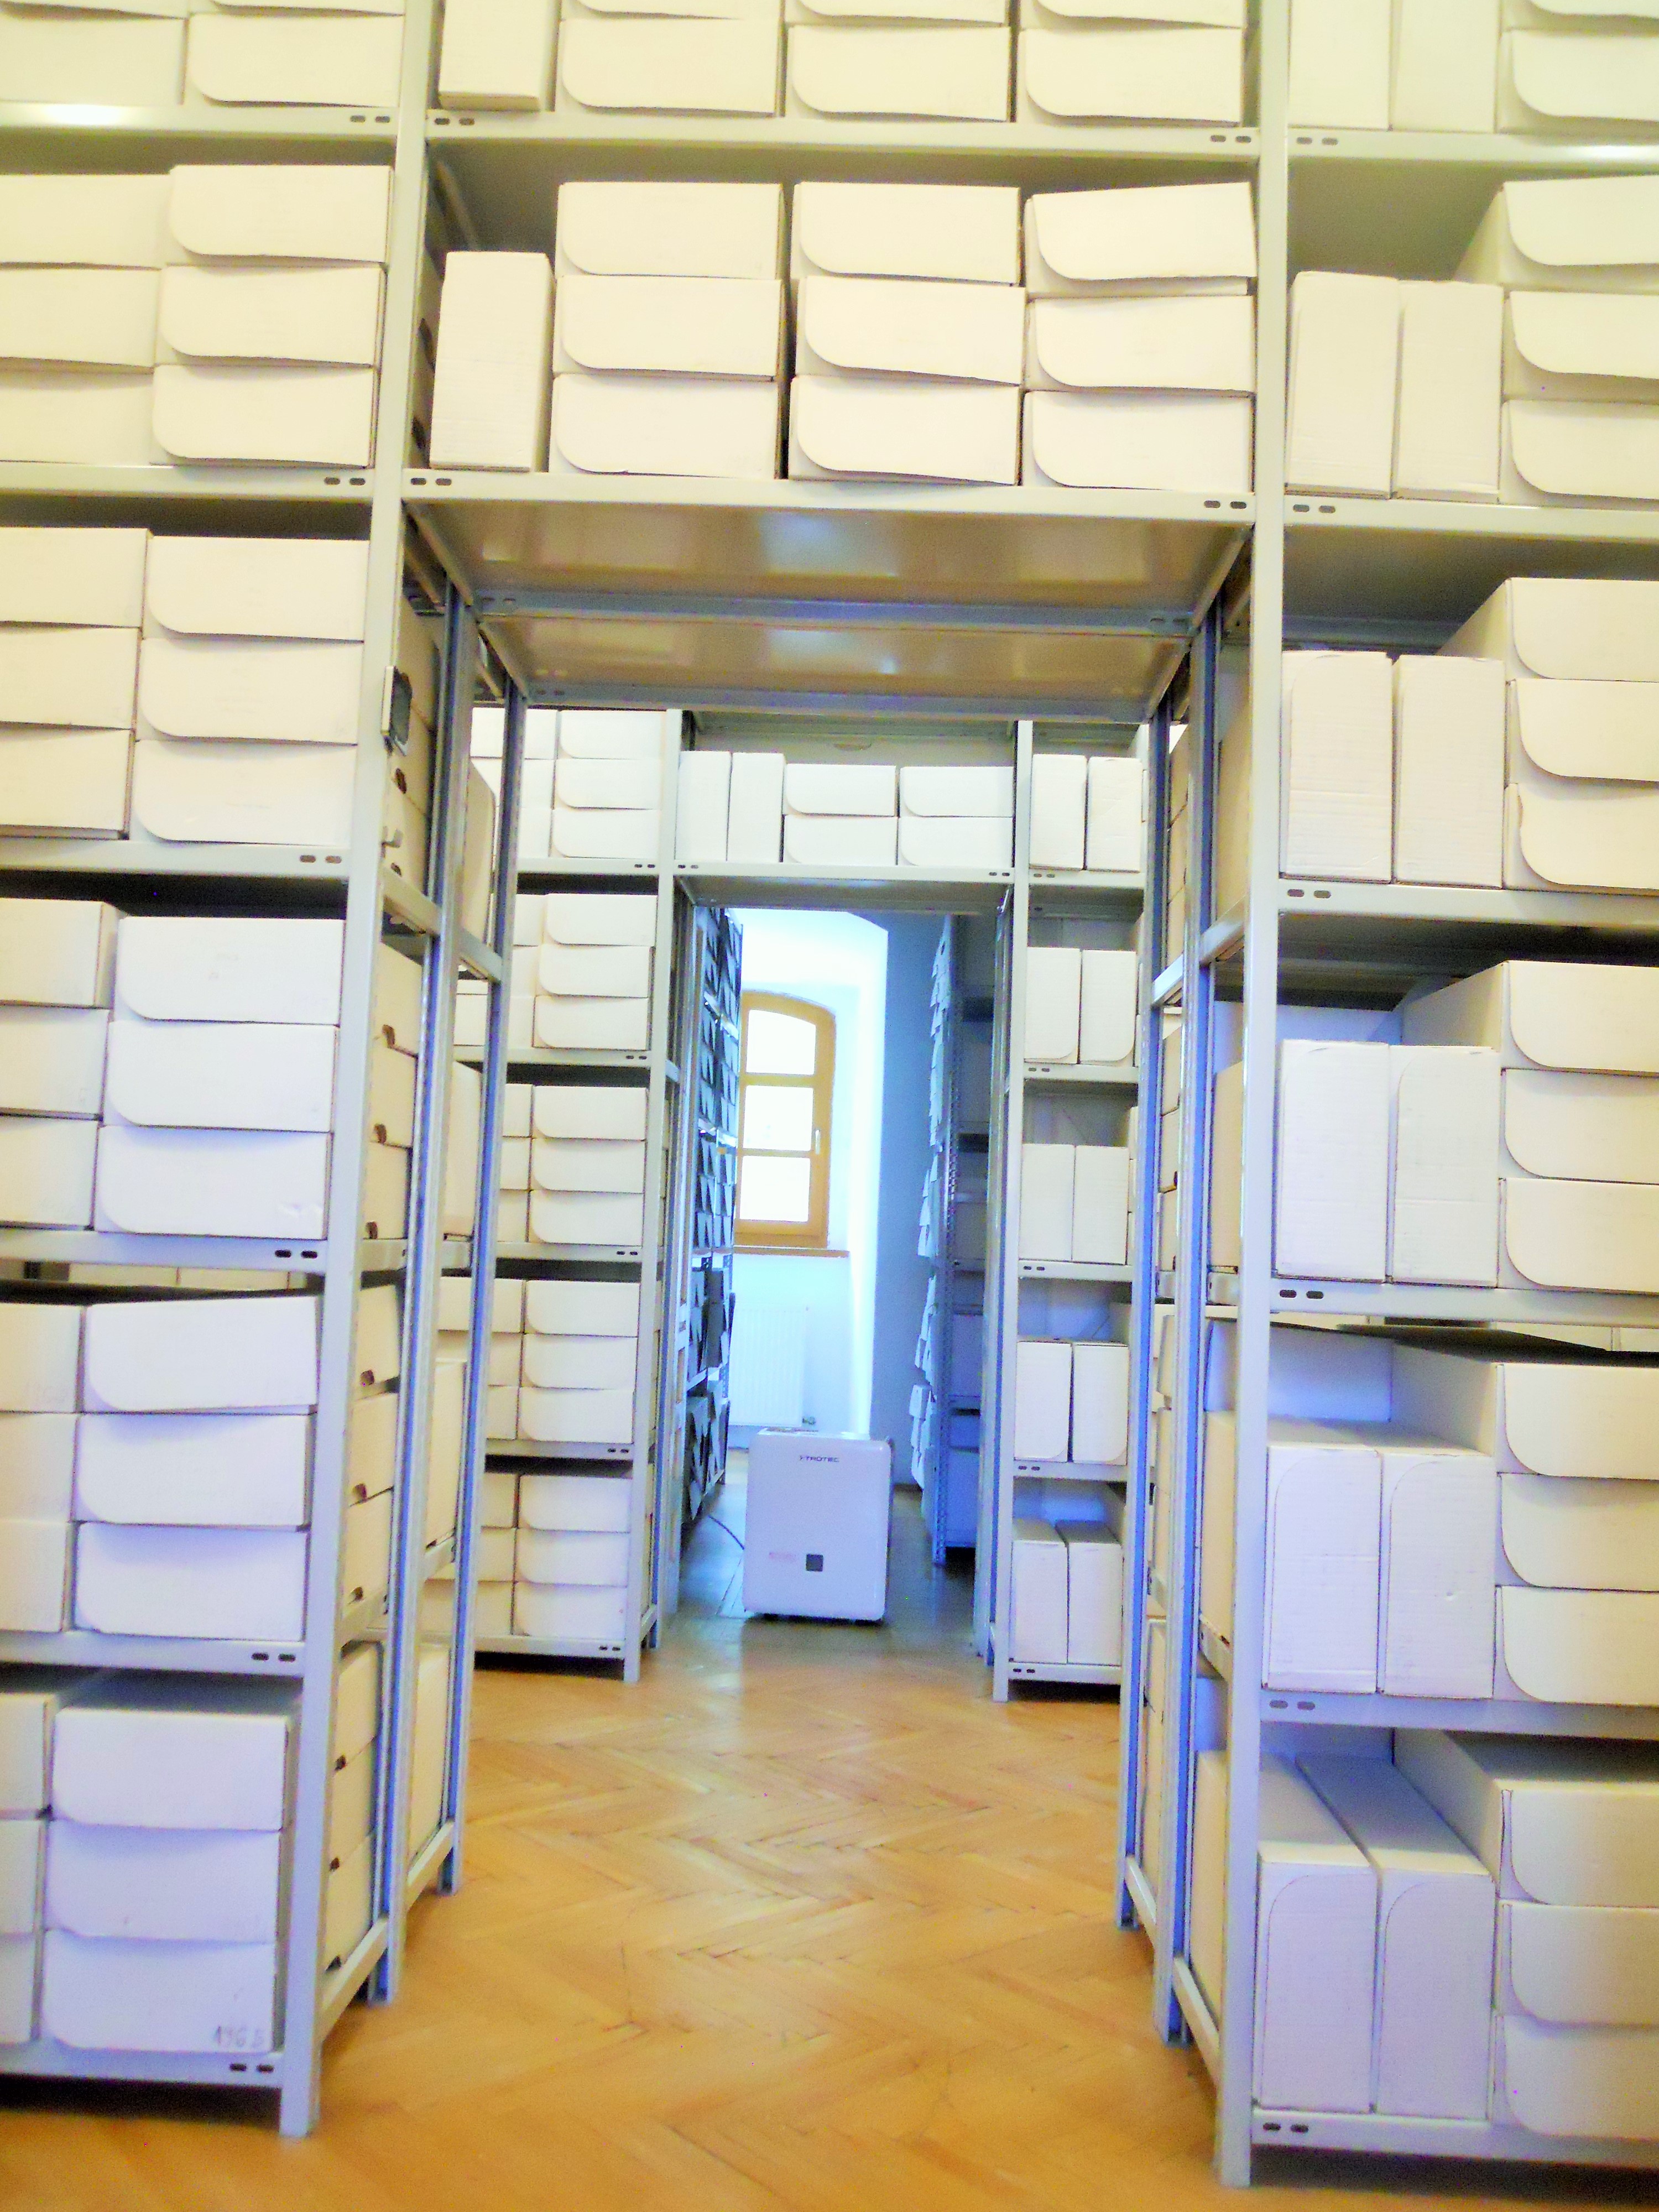 The interior of the Archbishopric and Chapter Archives